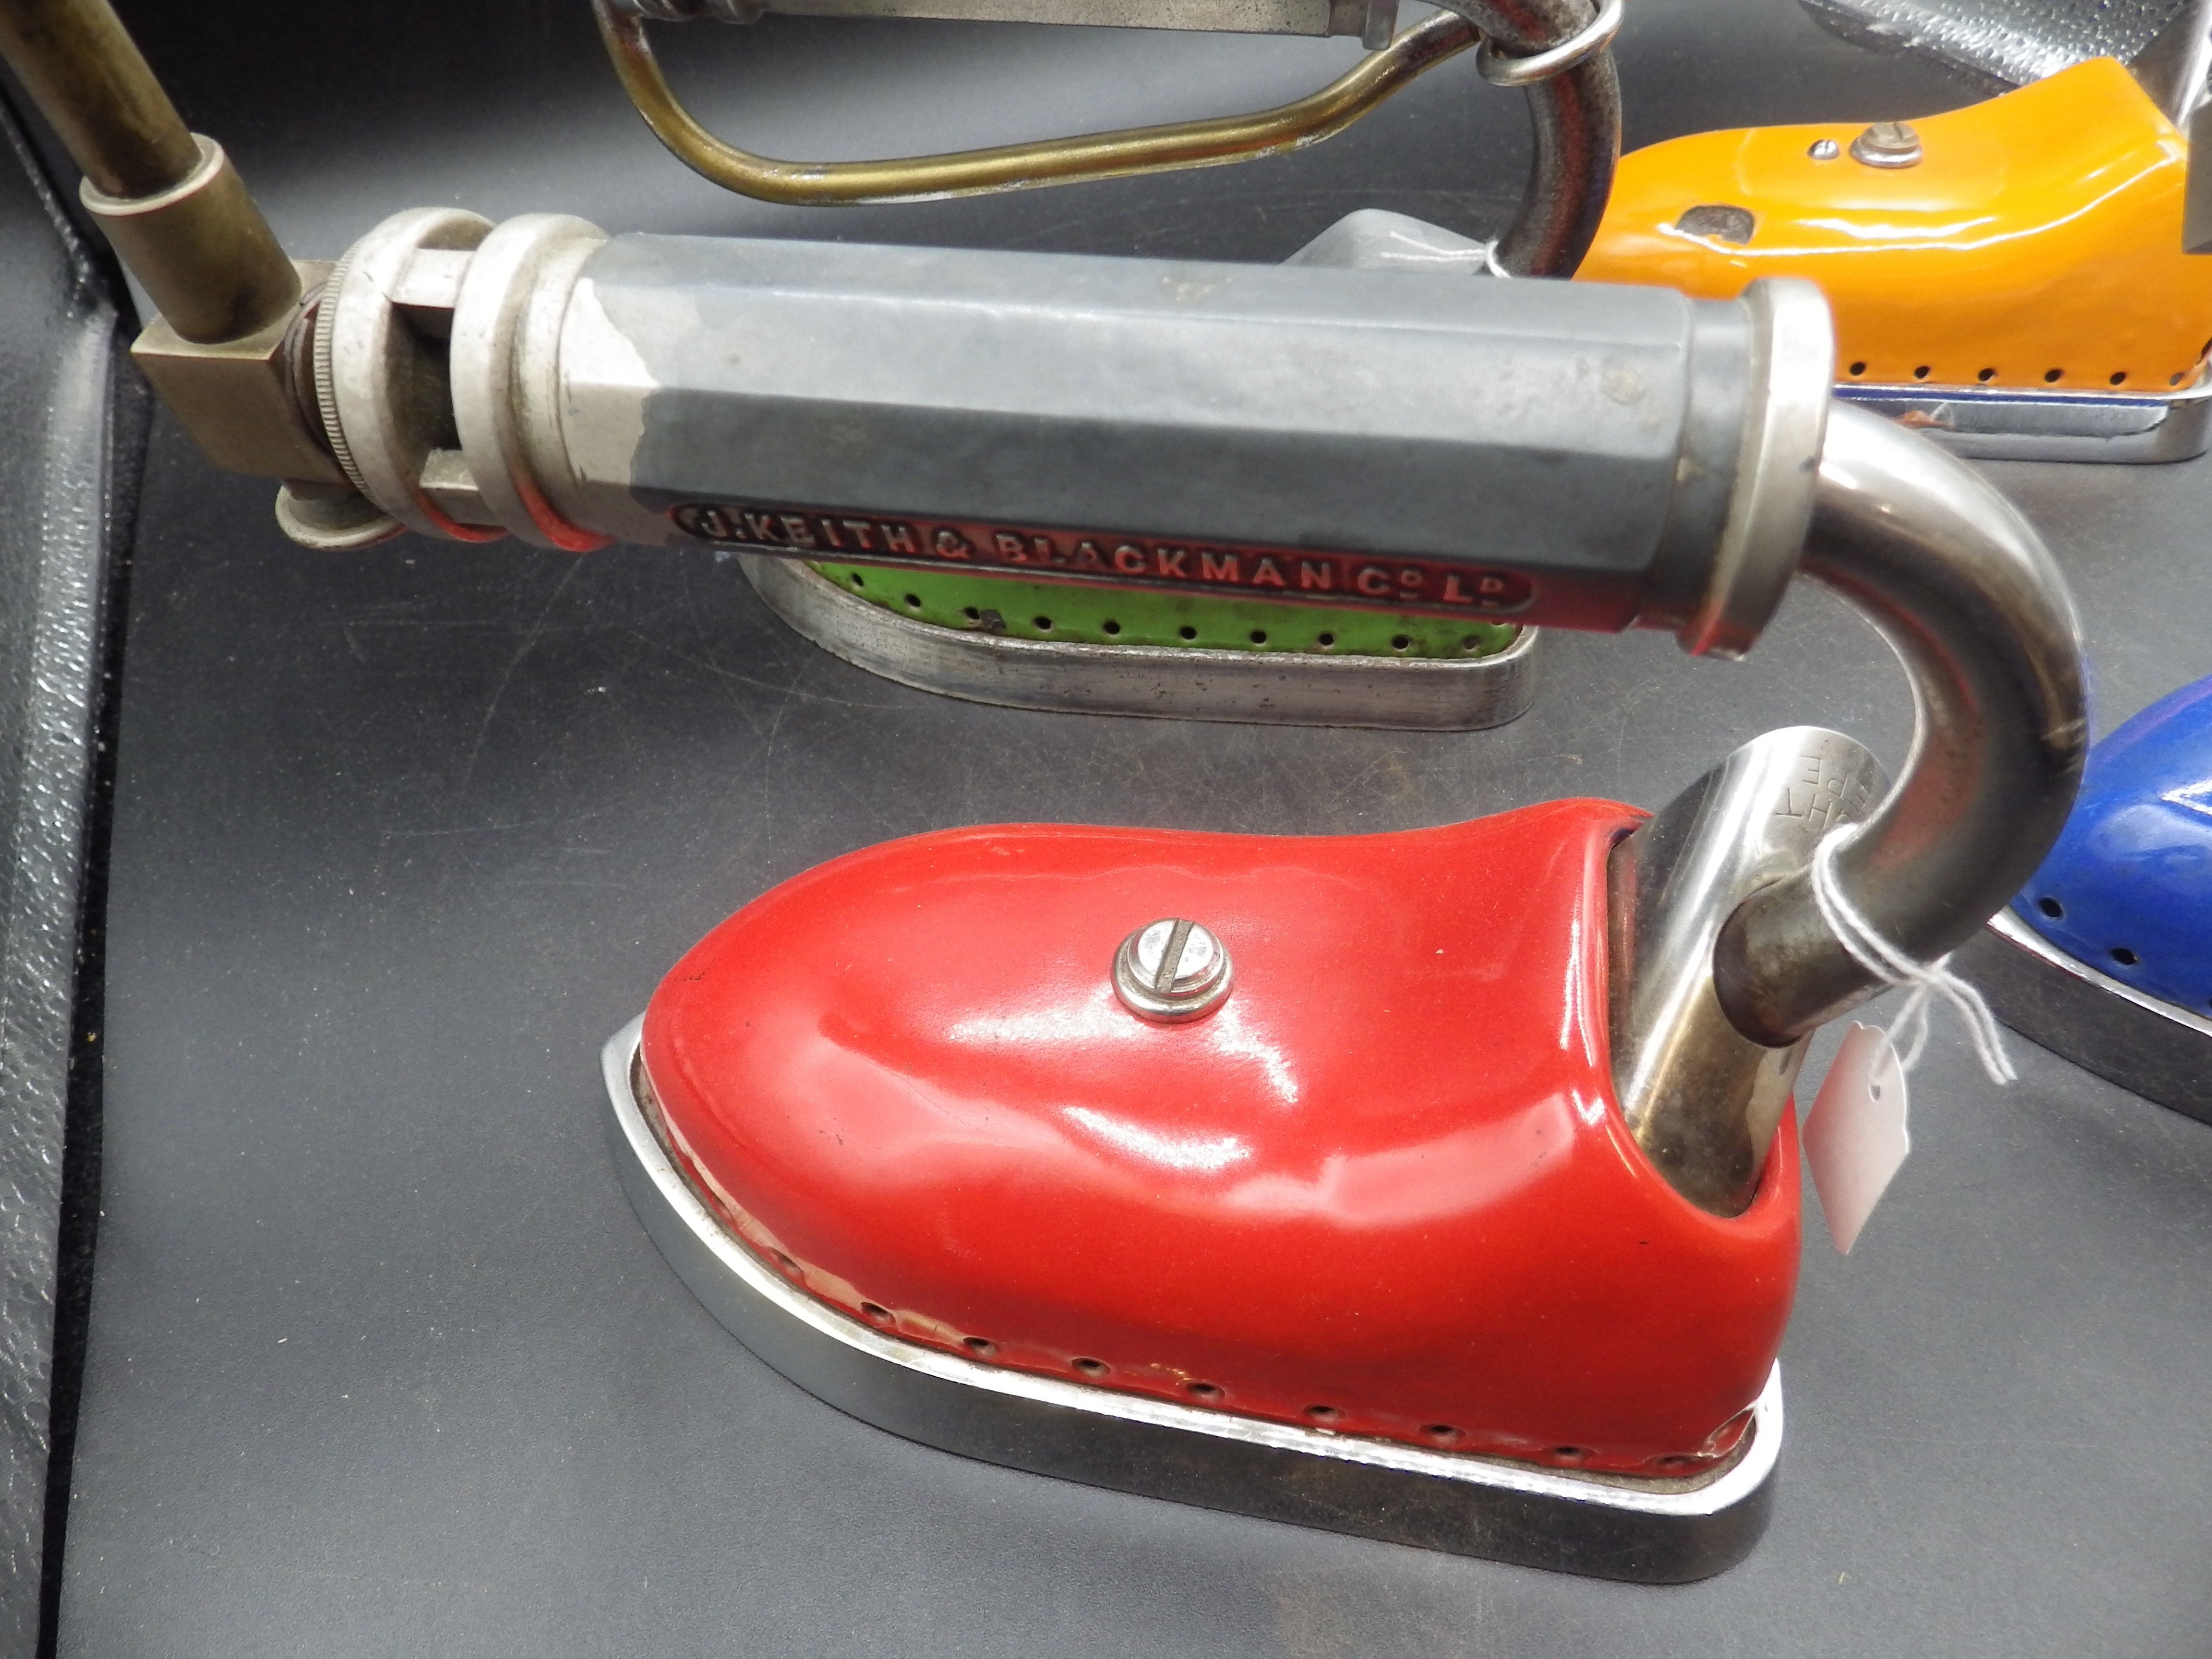 4 J Keith & Blackman Co Ltd patent 360555 coloured enamel irons in red, green, blue and orange - Image 2 of 3